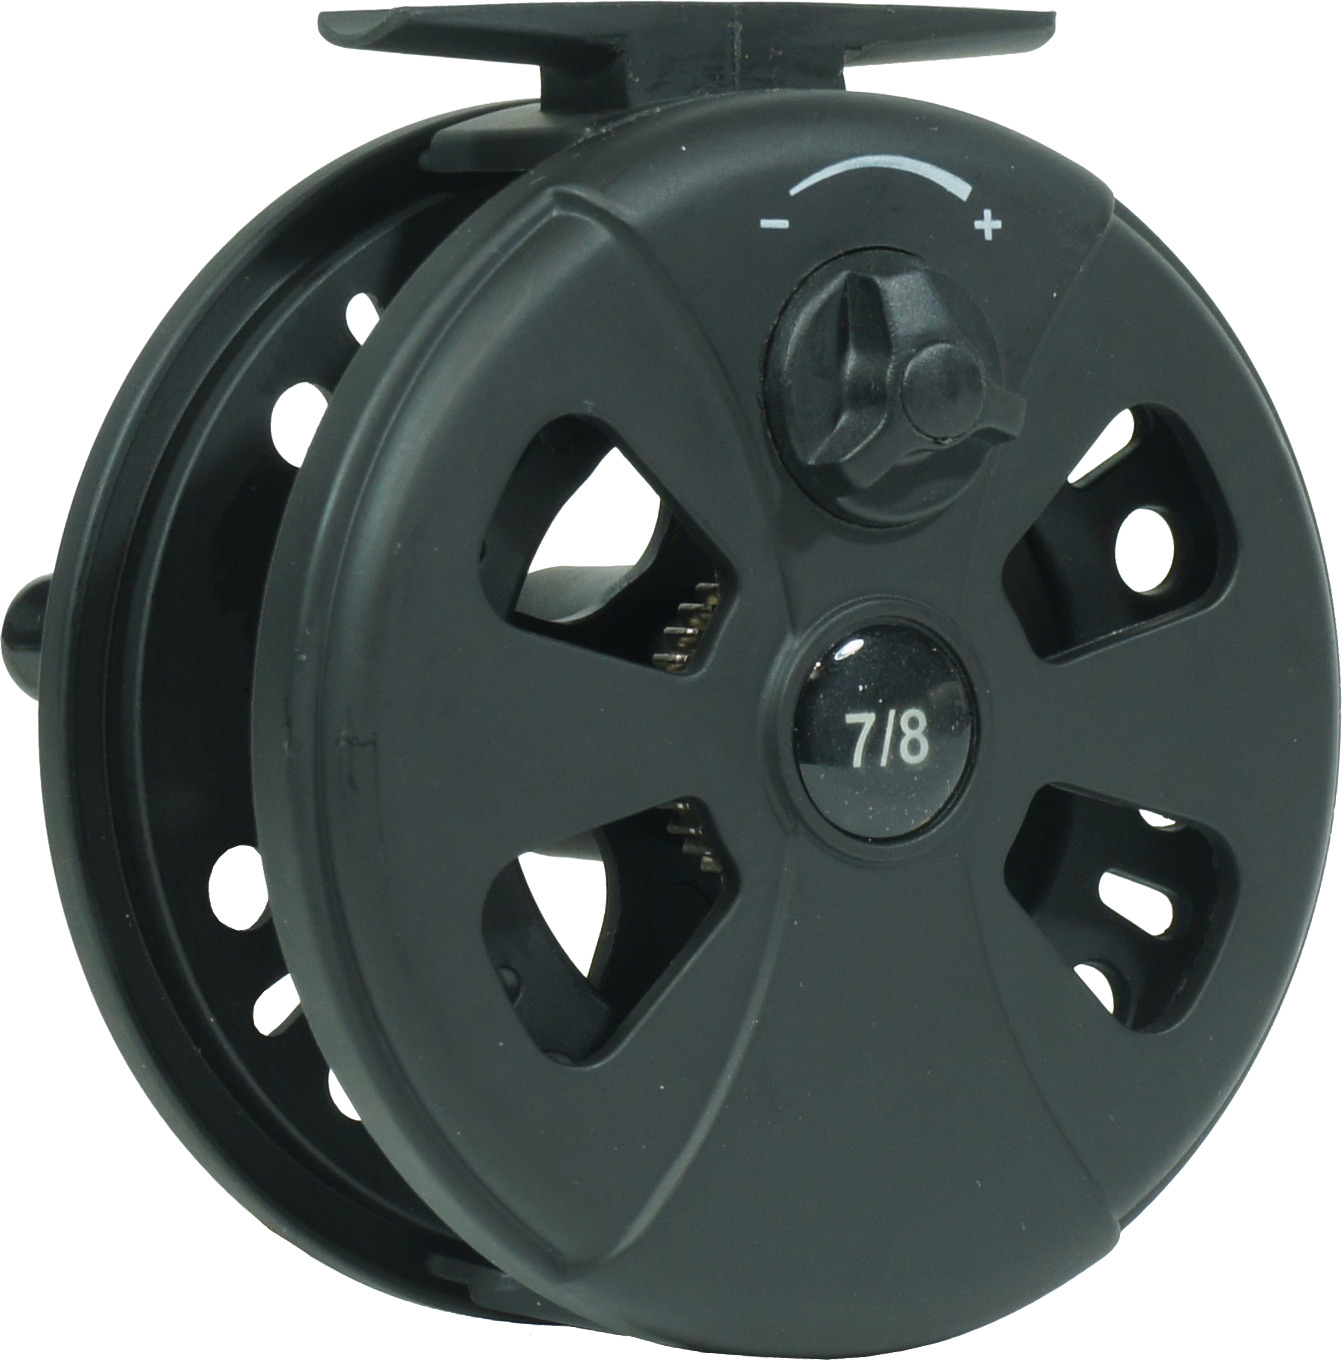 Stillwater PL-C Trout Fly Reels Reel : Size: #7/8 – Glasgow Angling Centre